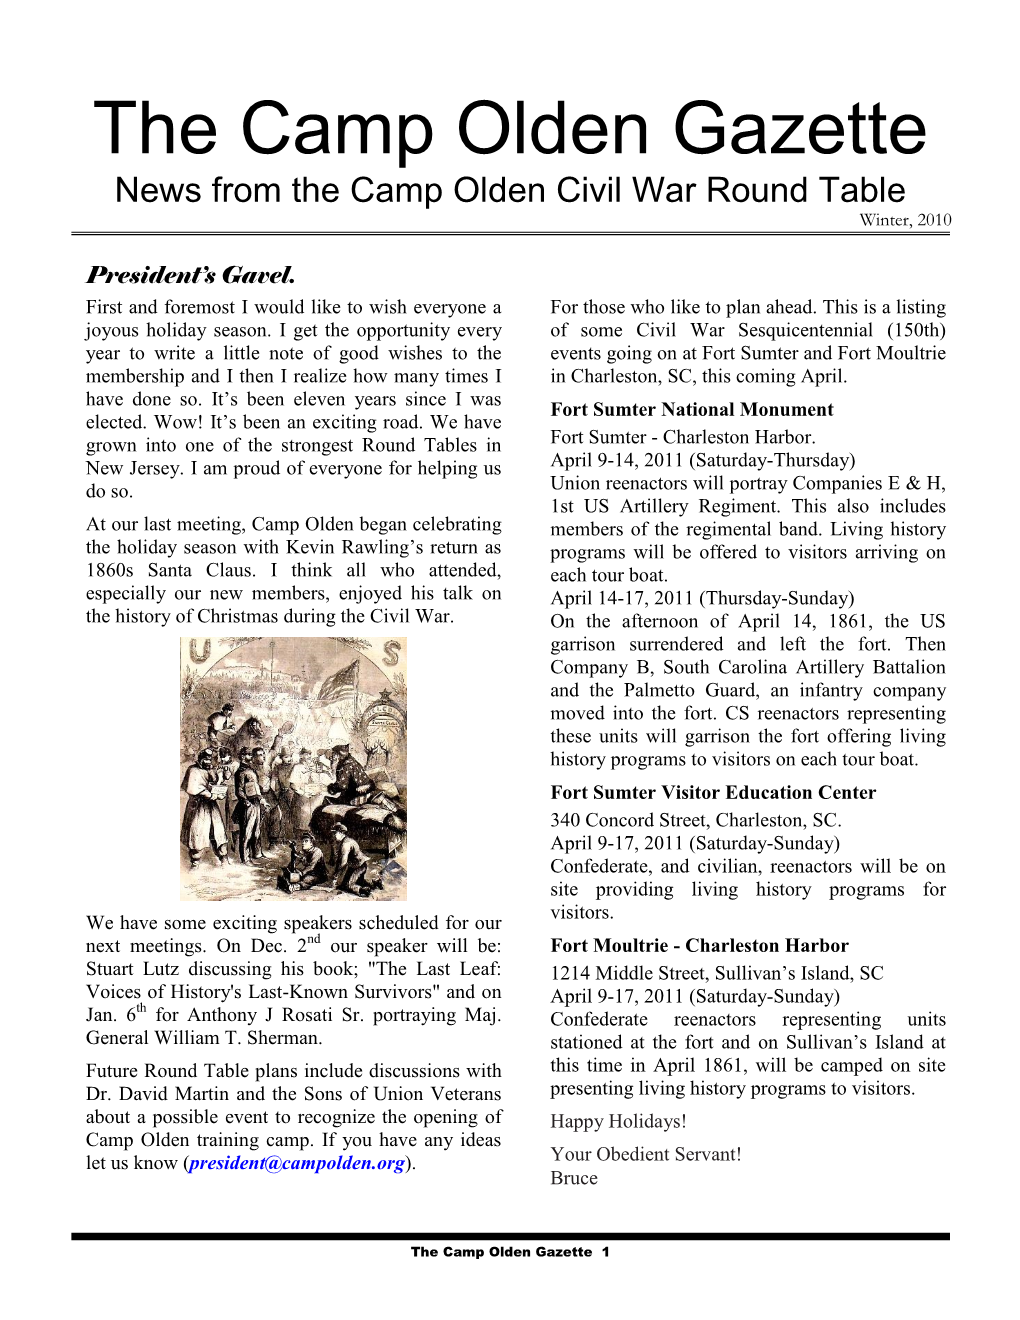 The Camp Olden Gazette News from the Camp Olden Civil War Round Table Winter, 2010